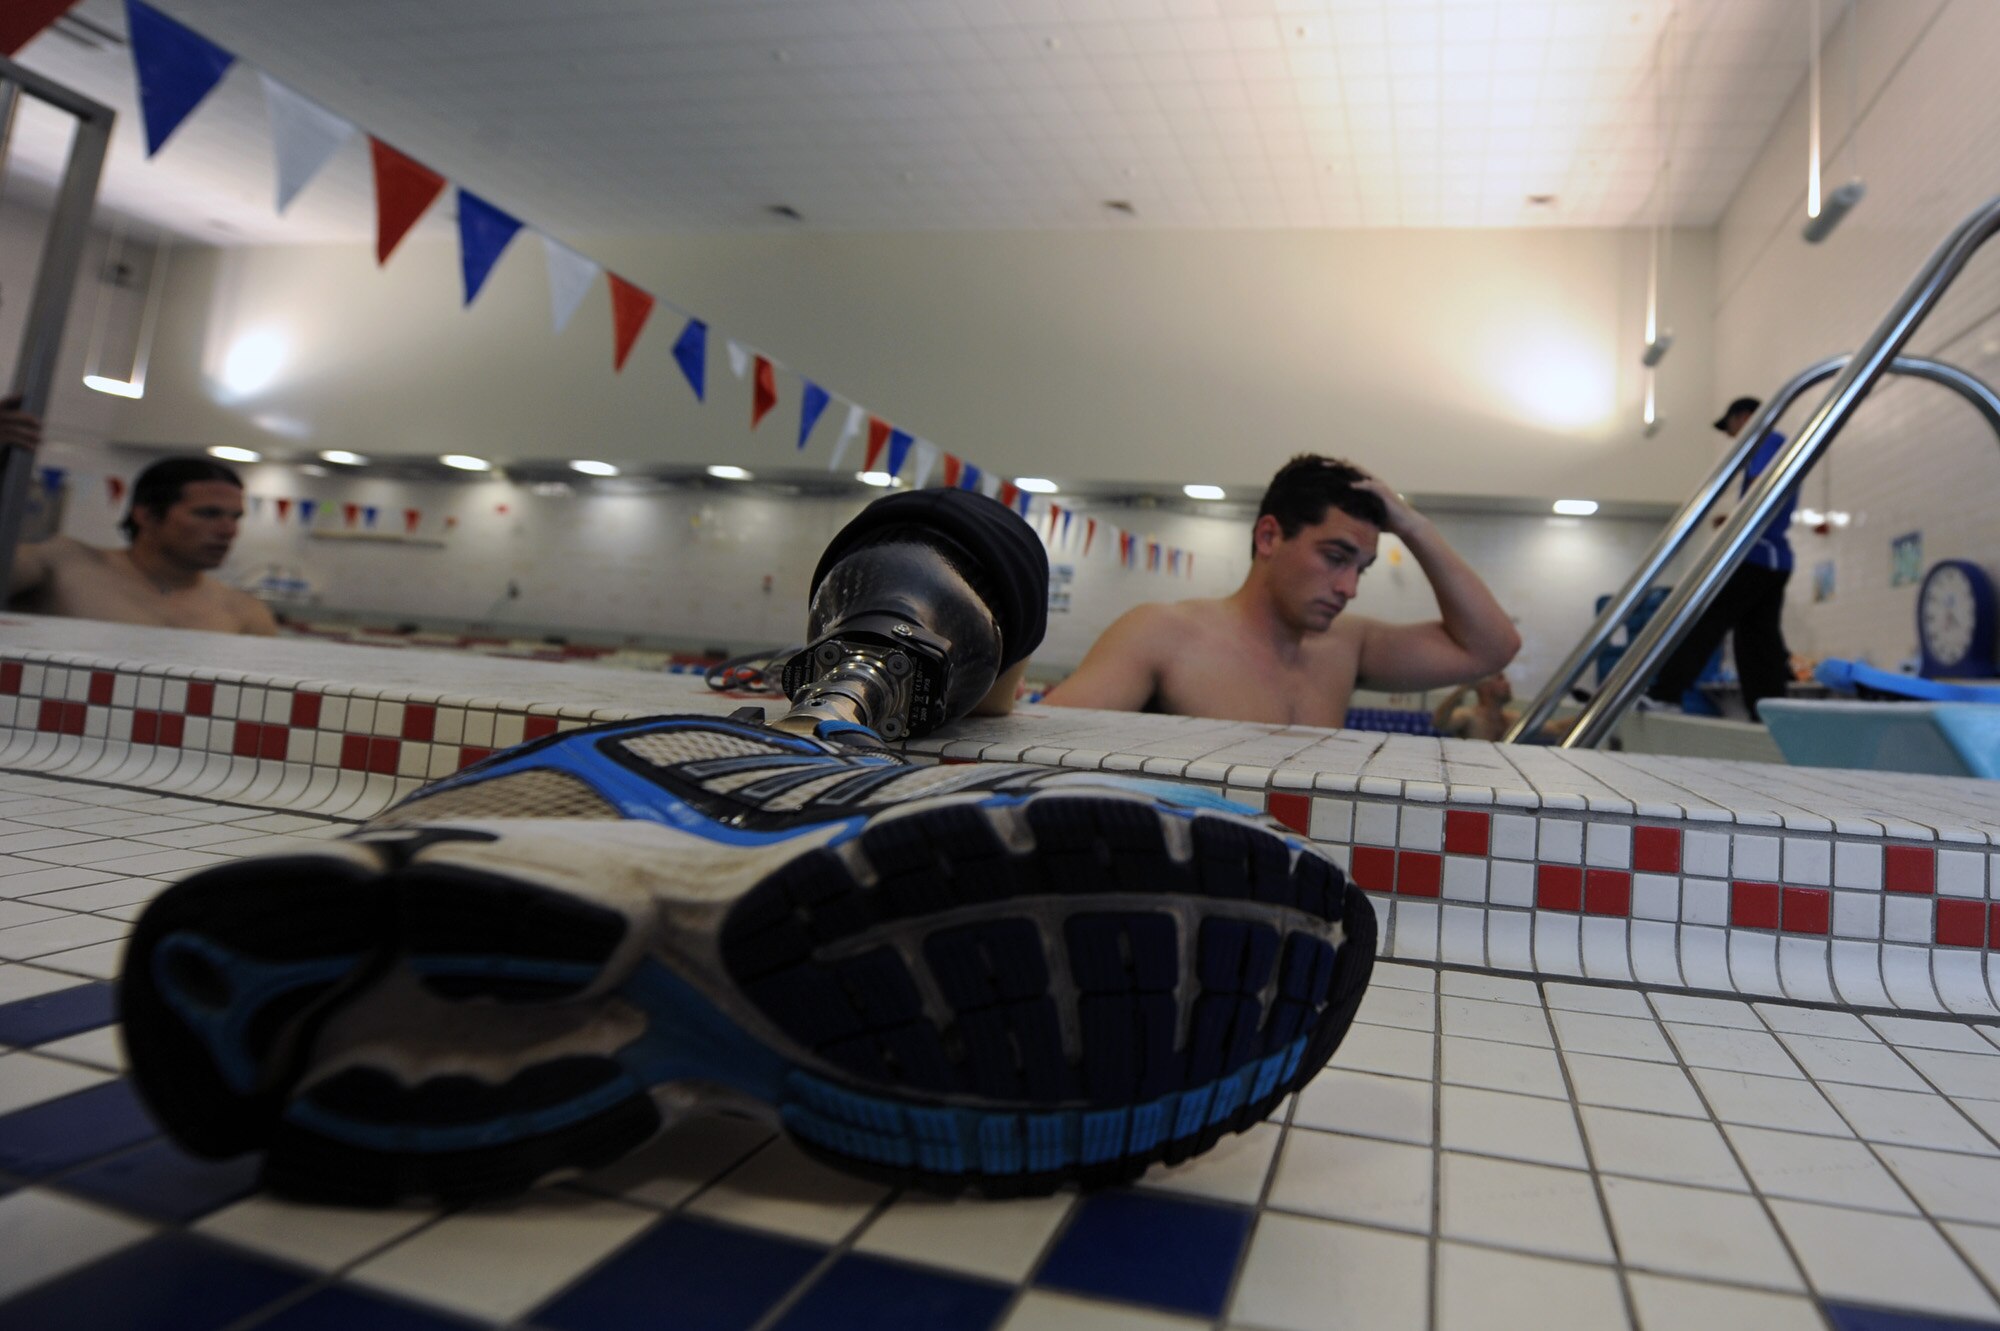 2nd Lt. Ryan McGuire takes a break after finishing a lap May 7, 2010, in the pool at the Air Force Academy in Colorado Springs, Colo.  Lieutenant McGuire, a member of the Air Force team that is participating in the inaugural Warrior Games, is from Laughlin Air Force Base, Texas. The Warrior Games competition begins May 10 and finishes on May 14 and is taking place at the U.S. Olympic Training Center in Colorado Springs.  (U.S. Air Force photo/Staff Sgt. Desiree N. Palacios)